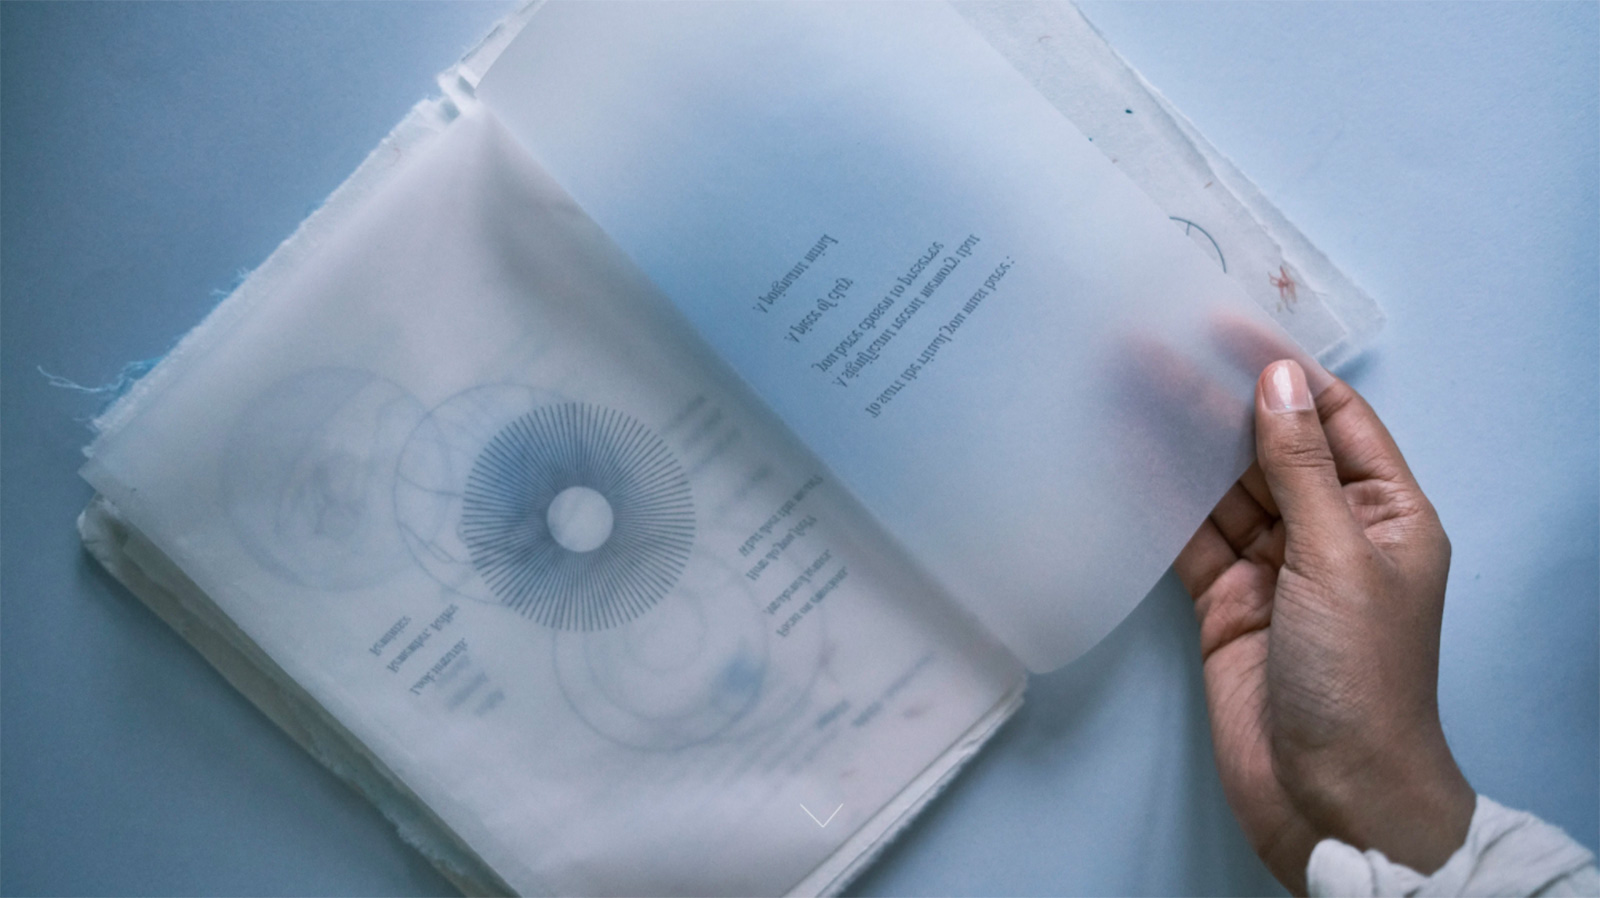 A reader opens an illustrated book printed on fine paper.